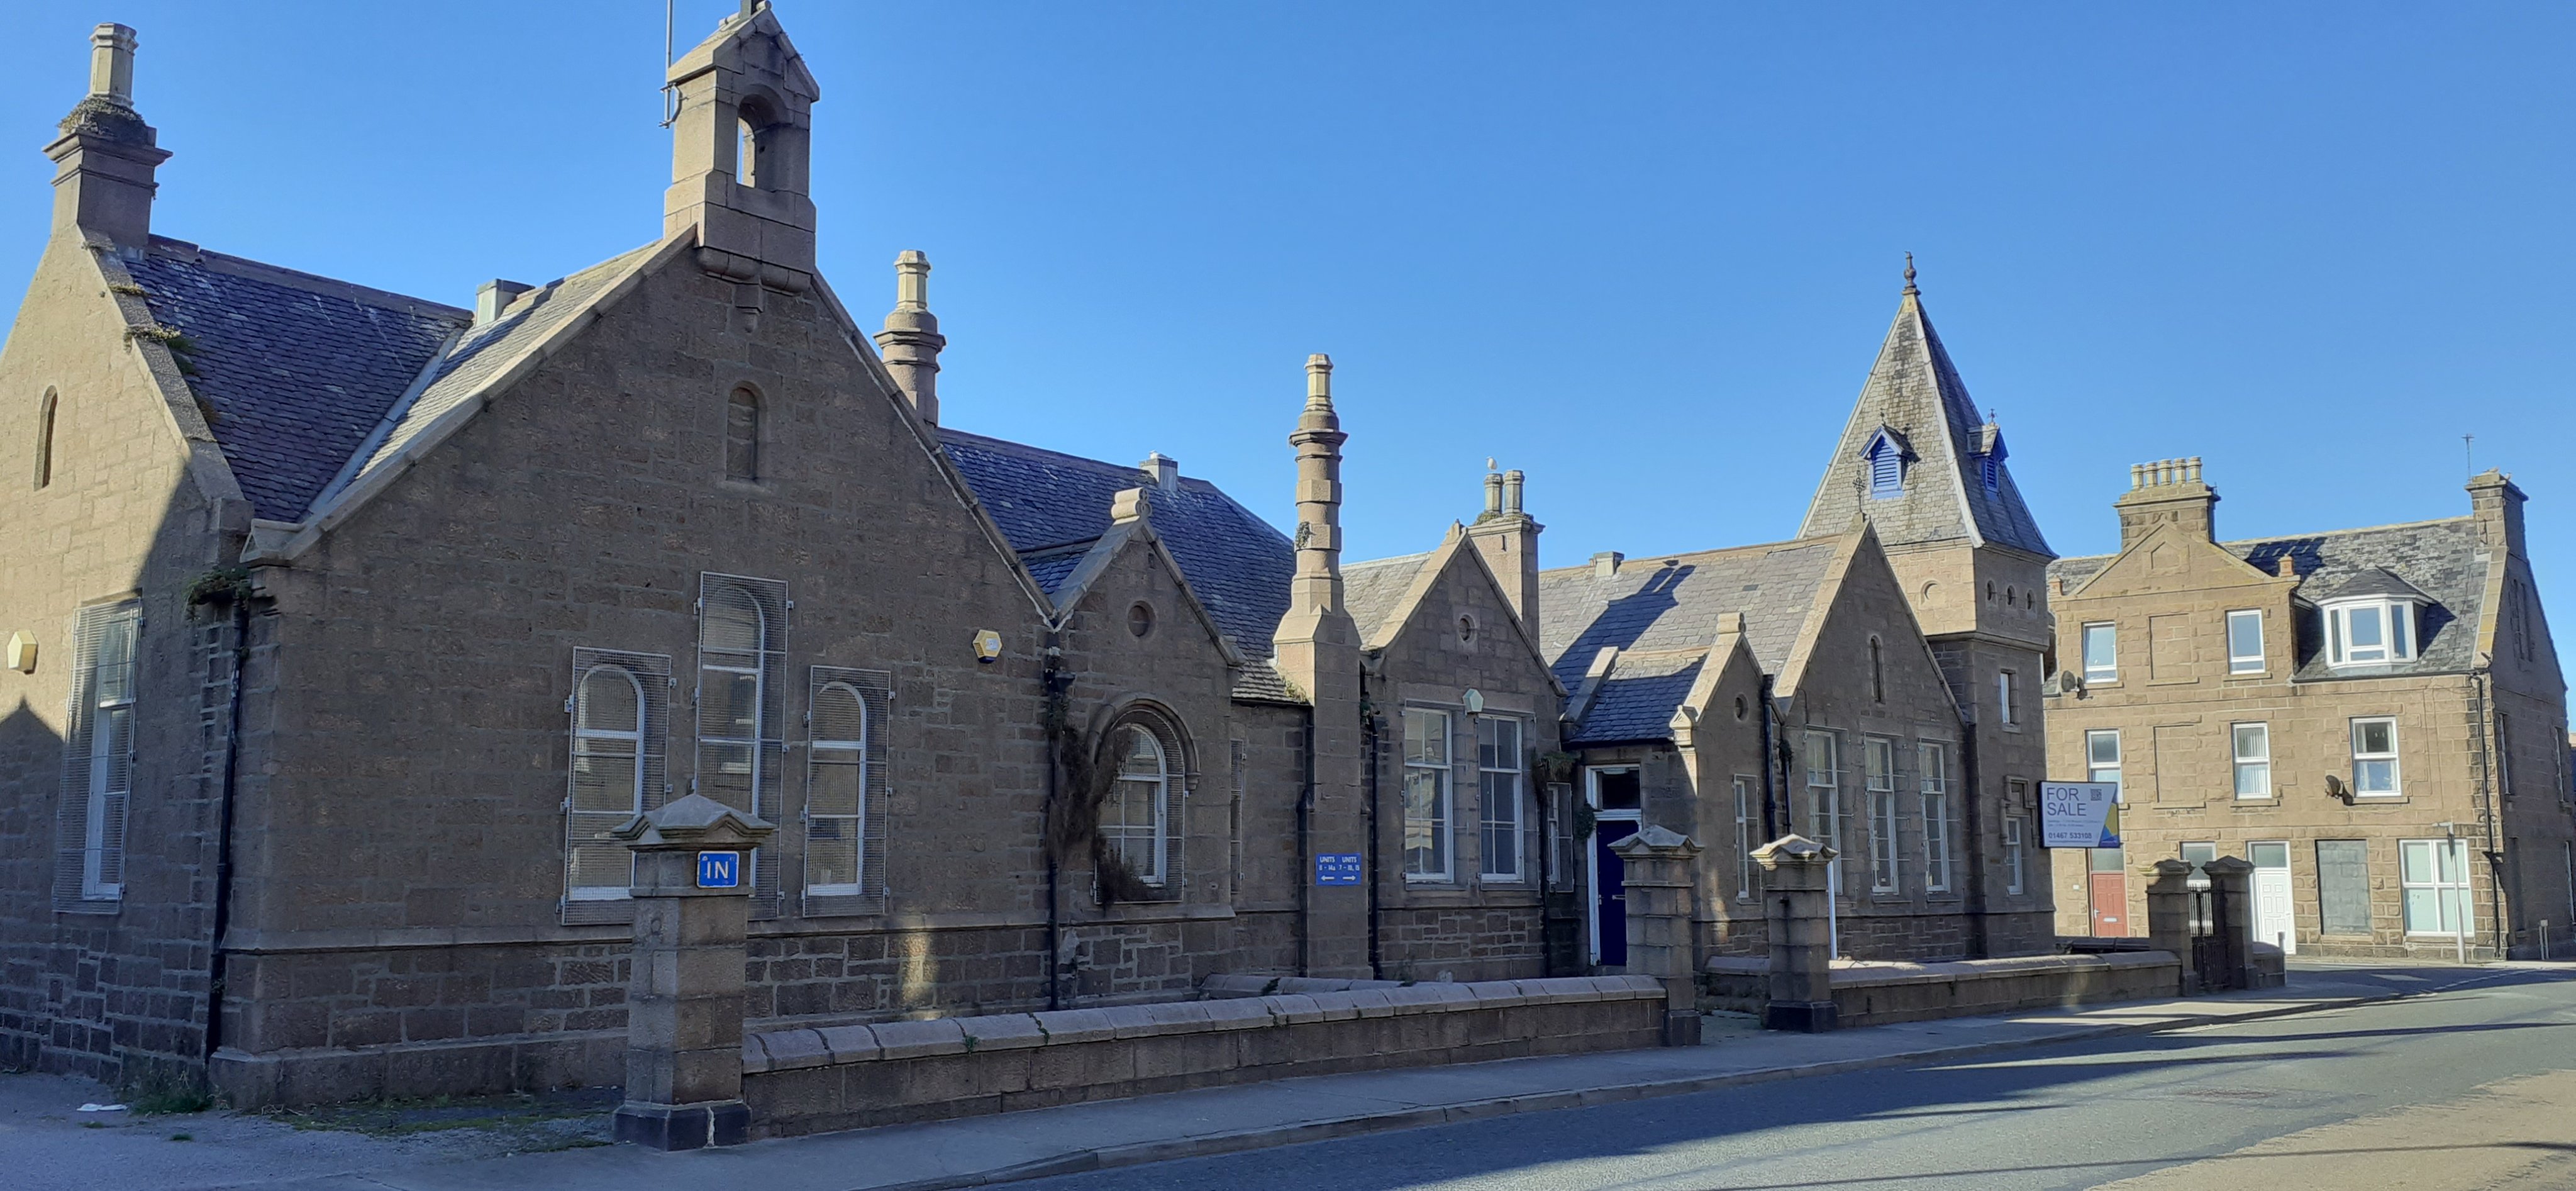 Former Peterhead business centre to be demolished after failed quest to find buyer